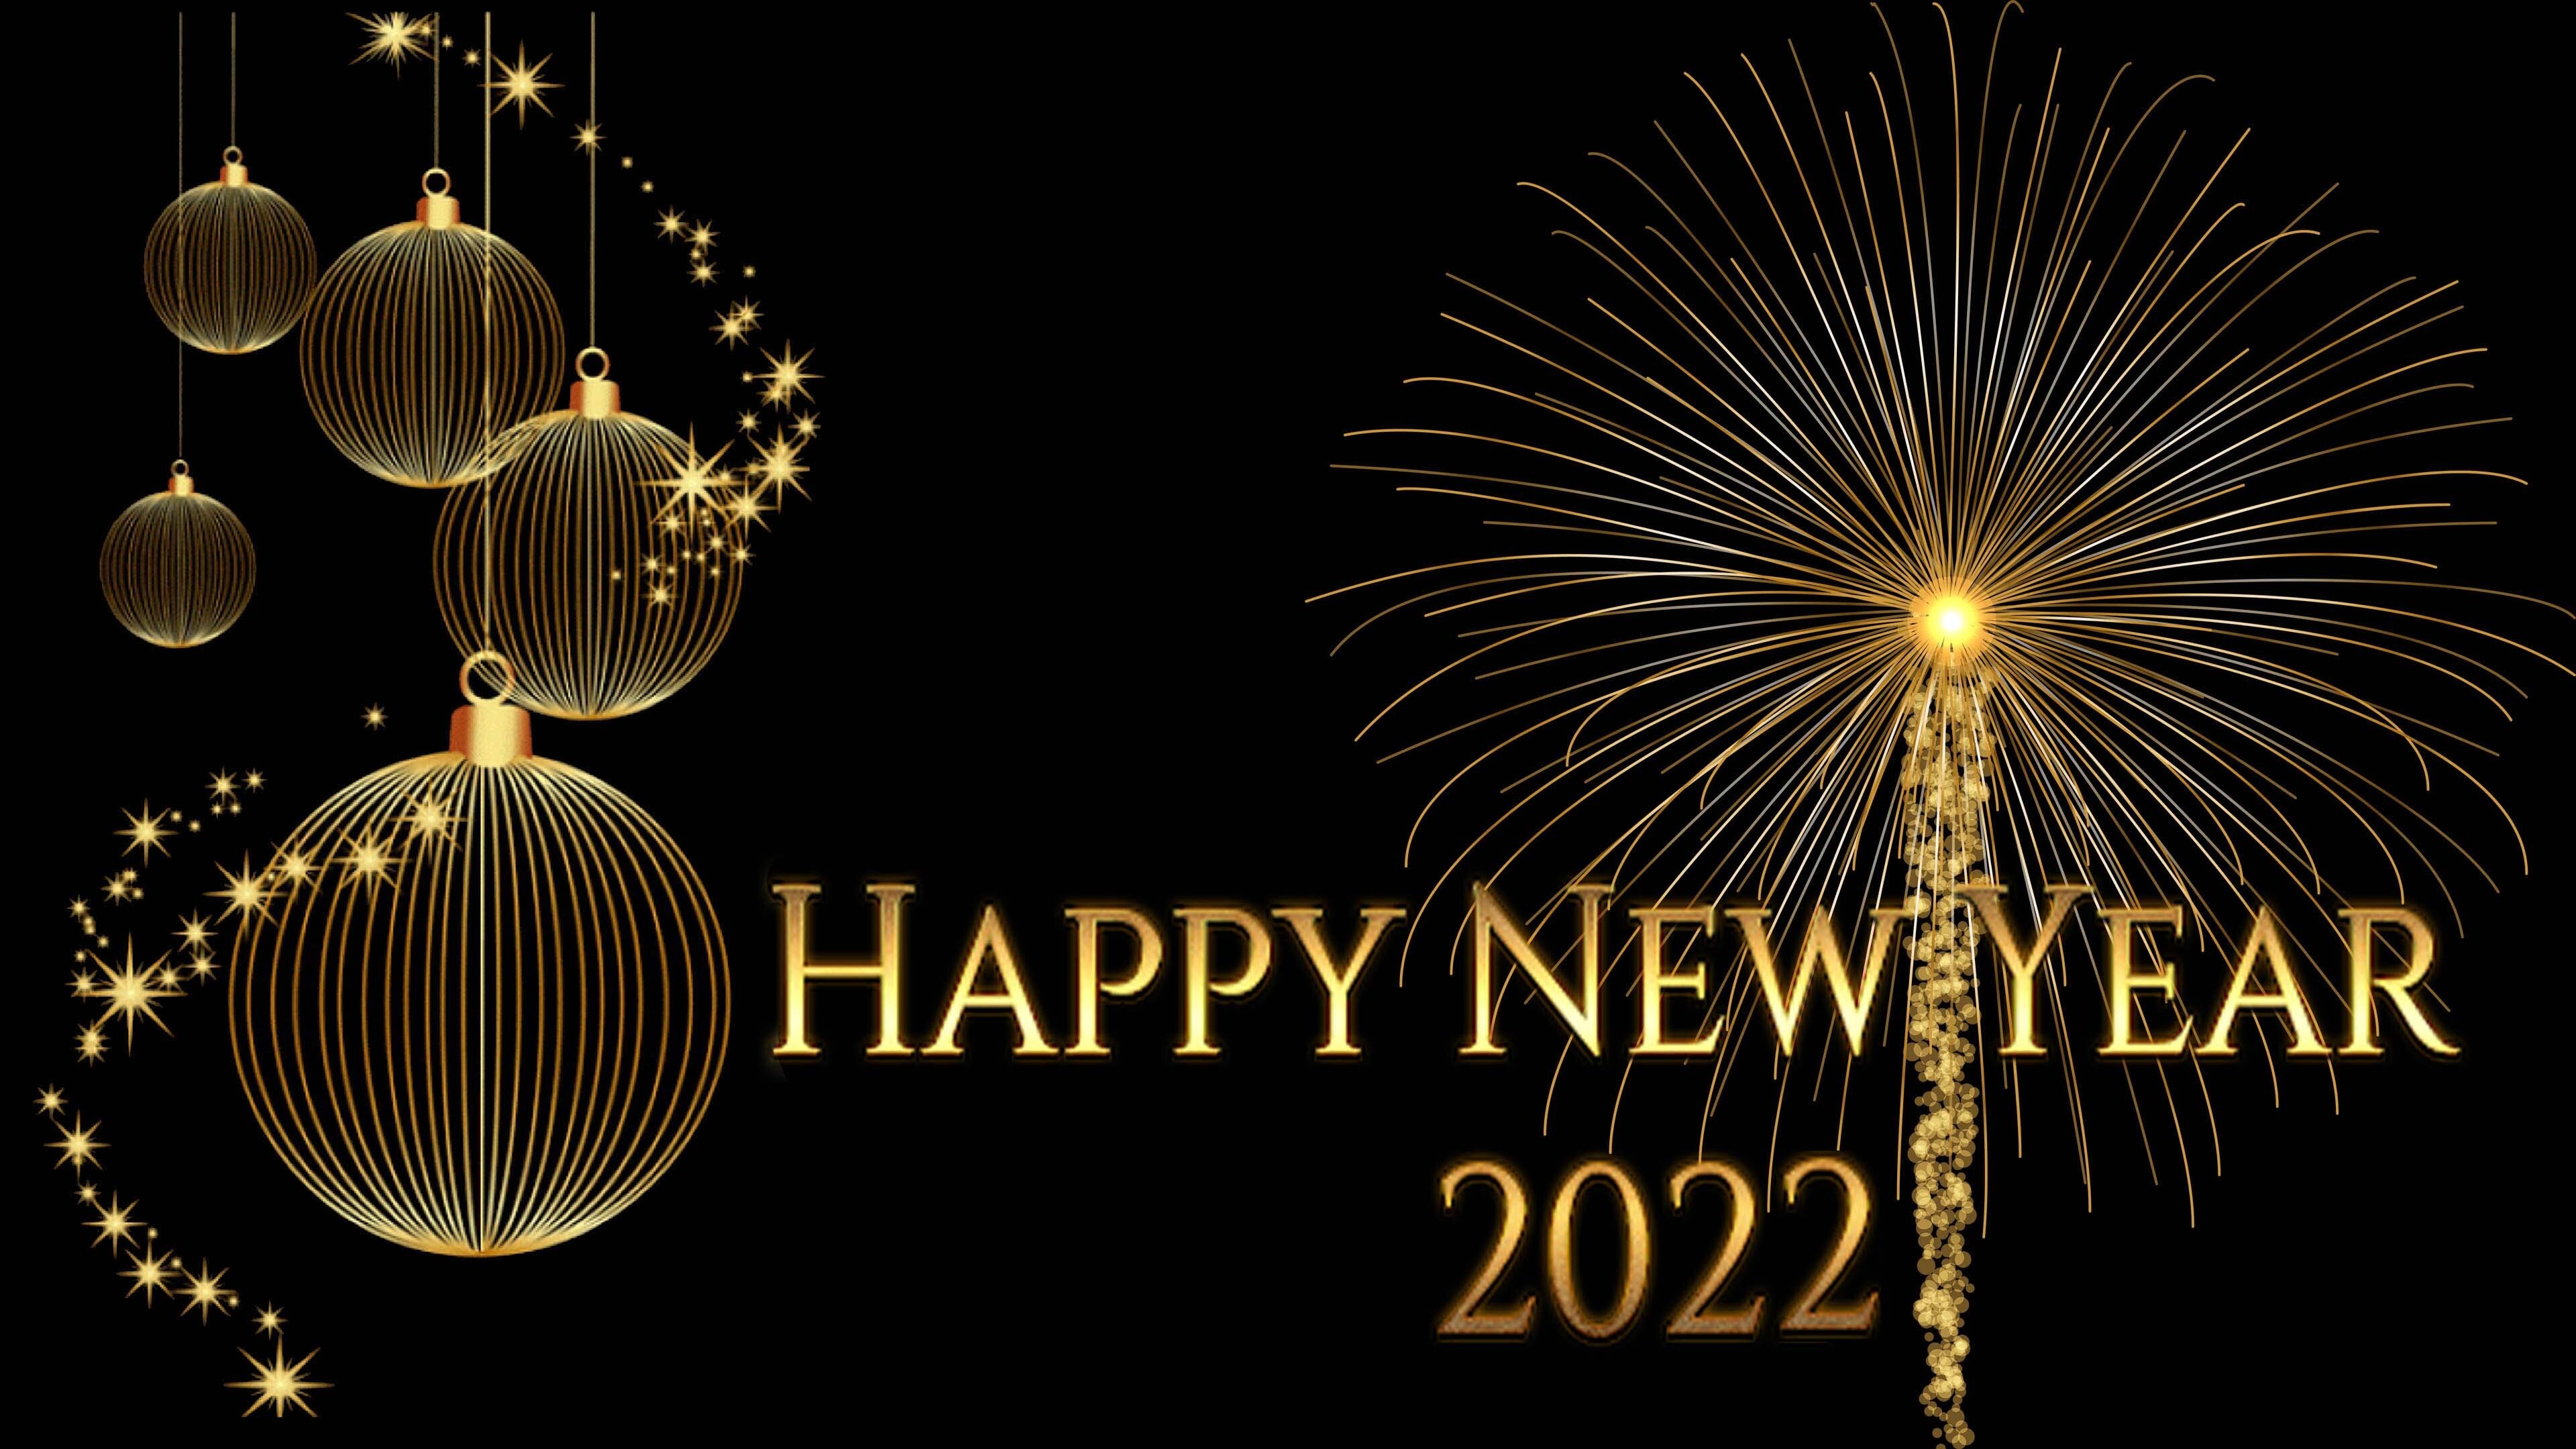 Happy-New-Year-2022-Gold-Fireworks-christmas-bulbs-Greetings-Card-for-or-Mobile-phones-Tablet-...jpg